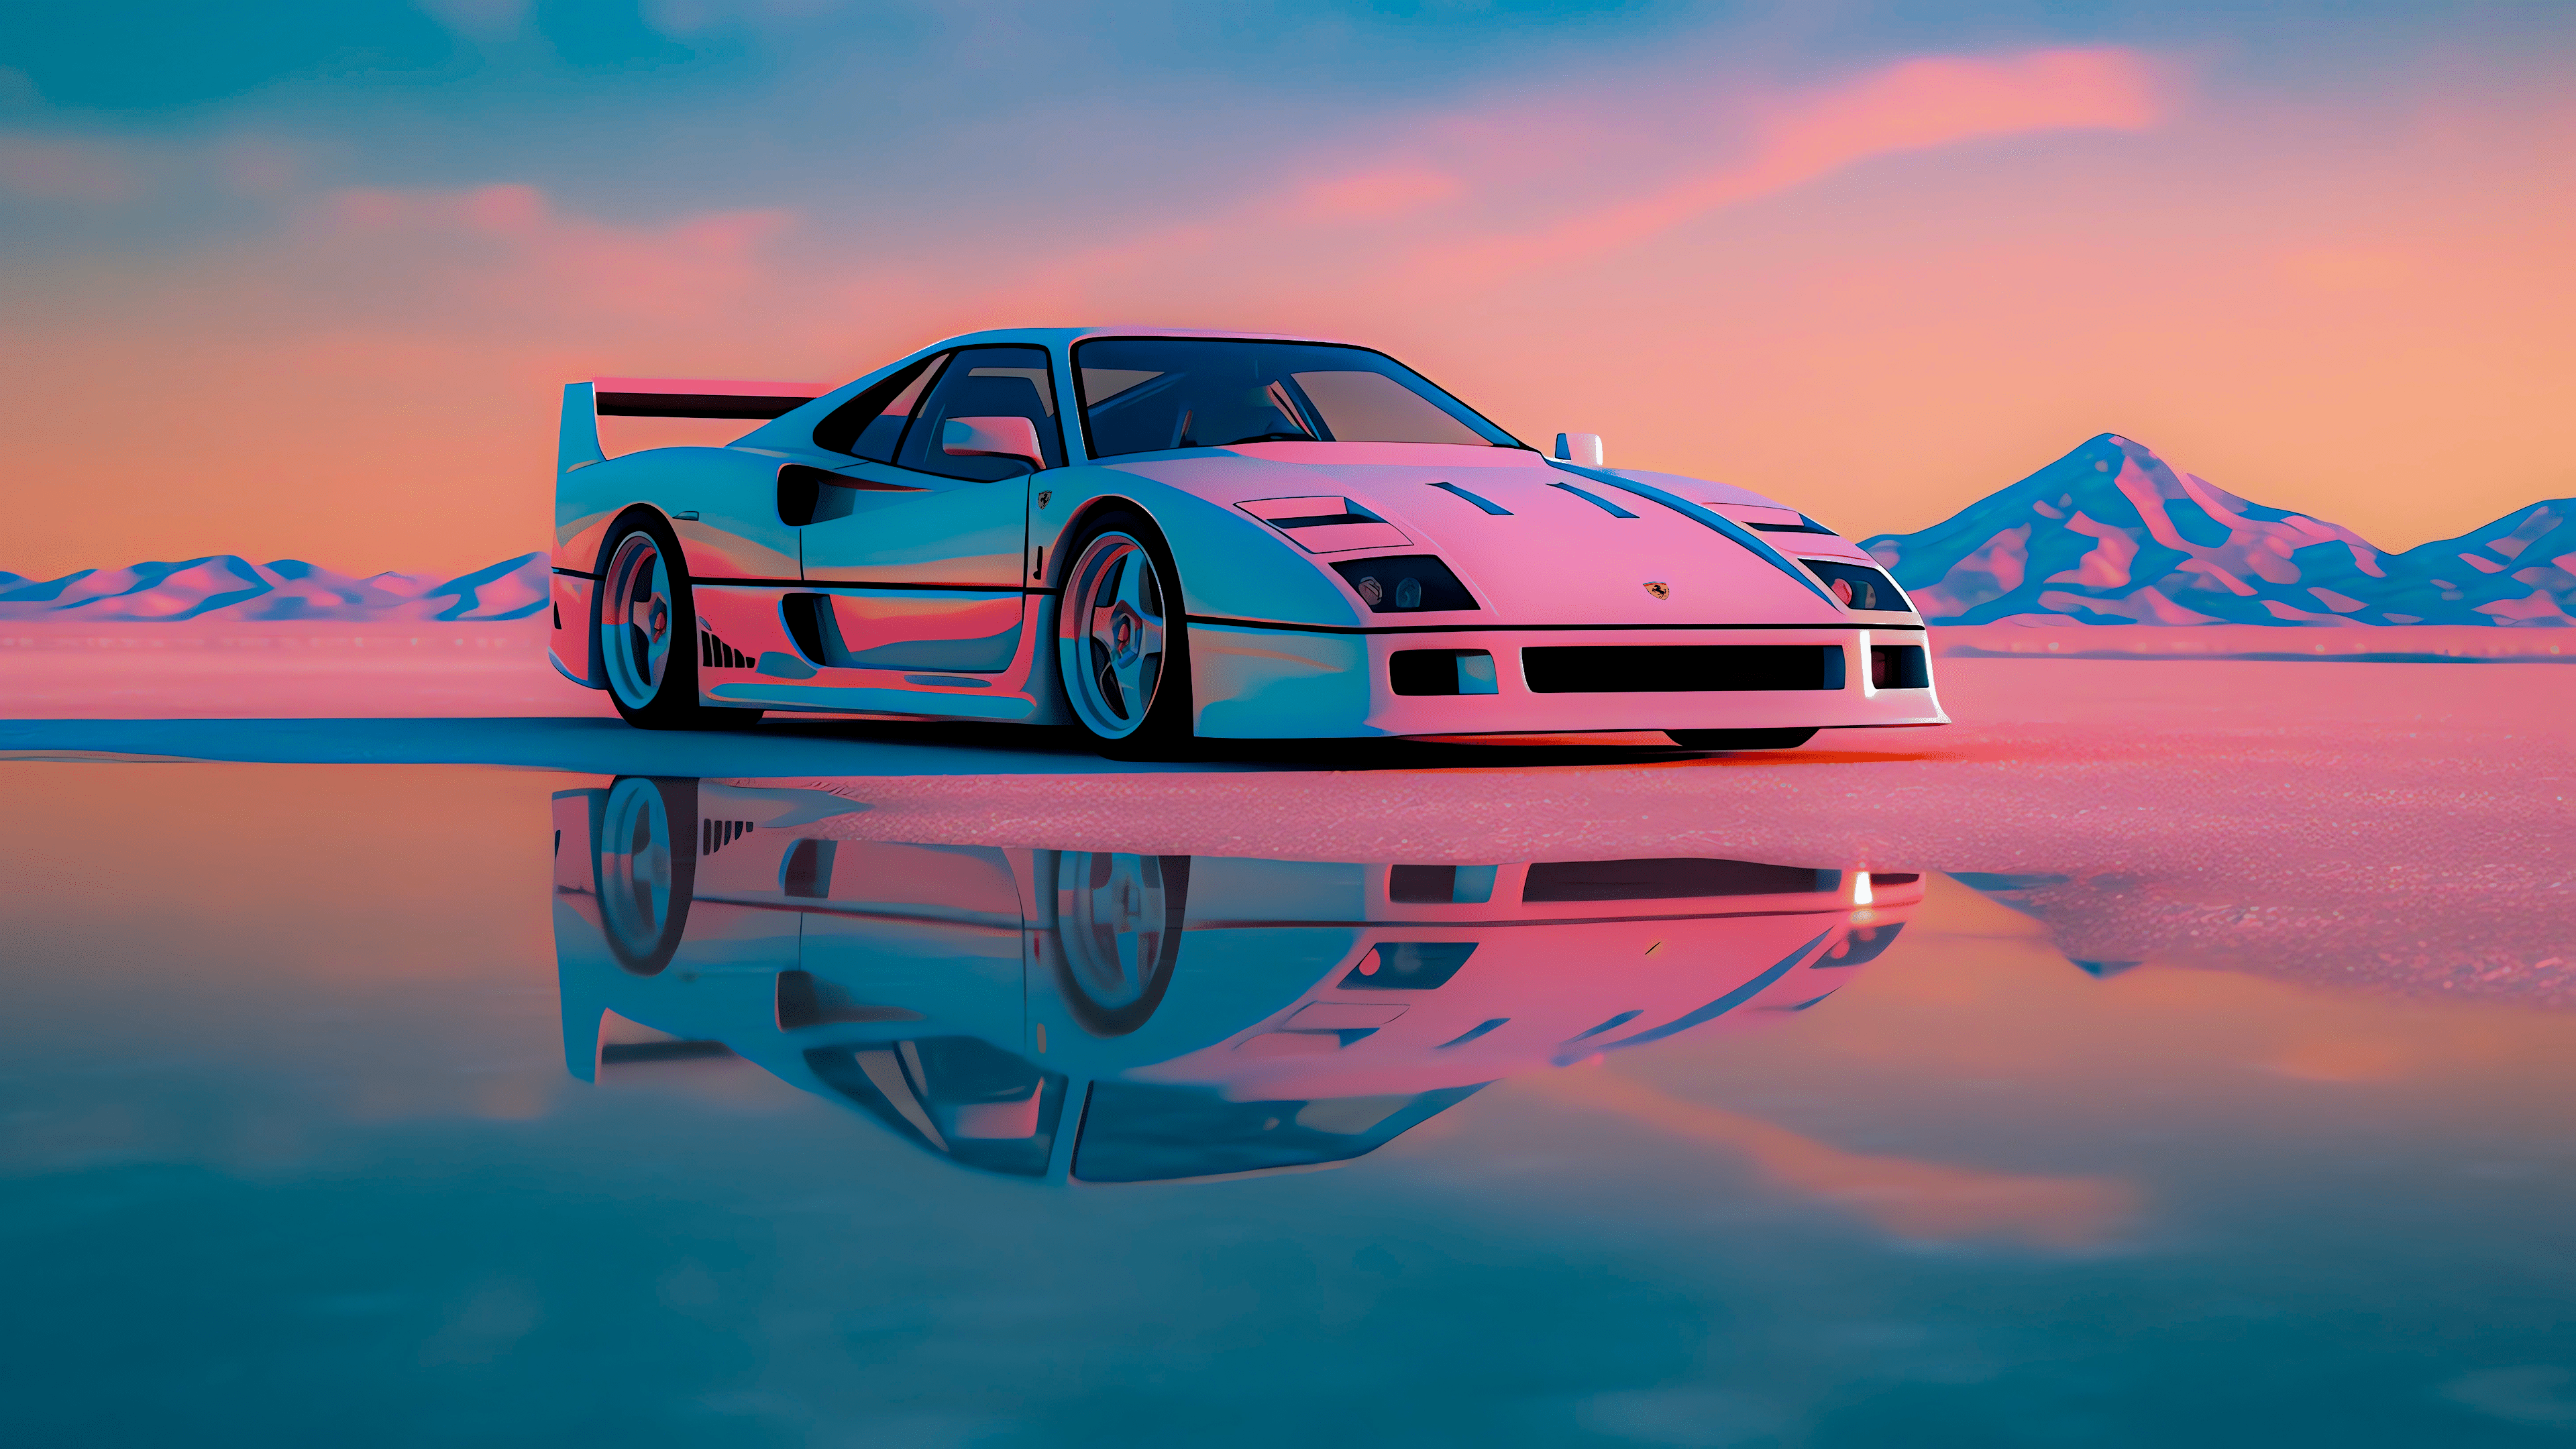 A render of a sports car with a sunset in the background - Cars